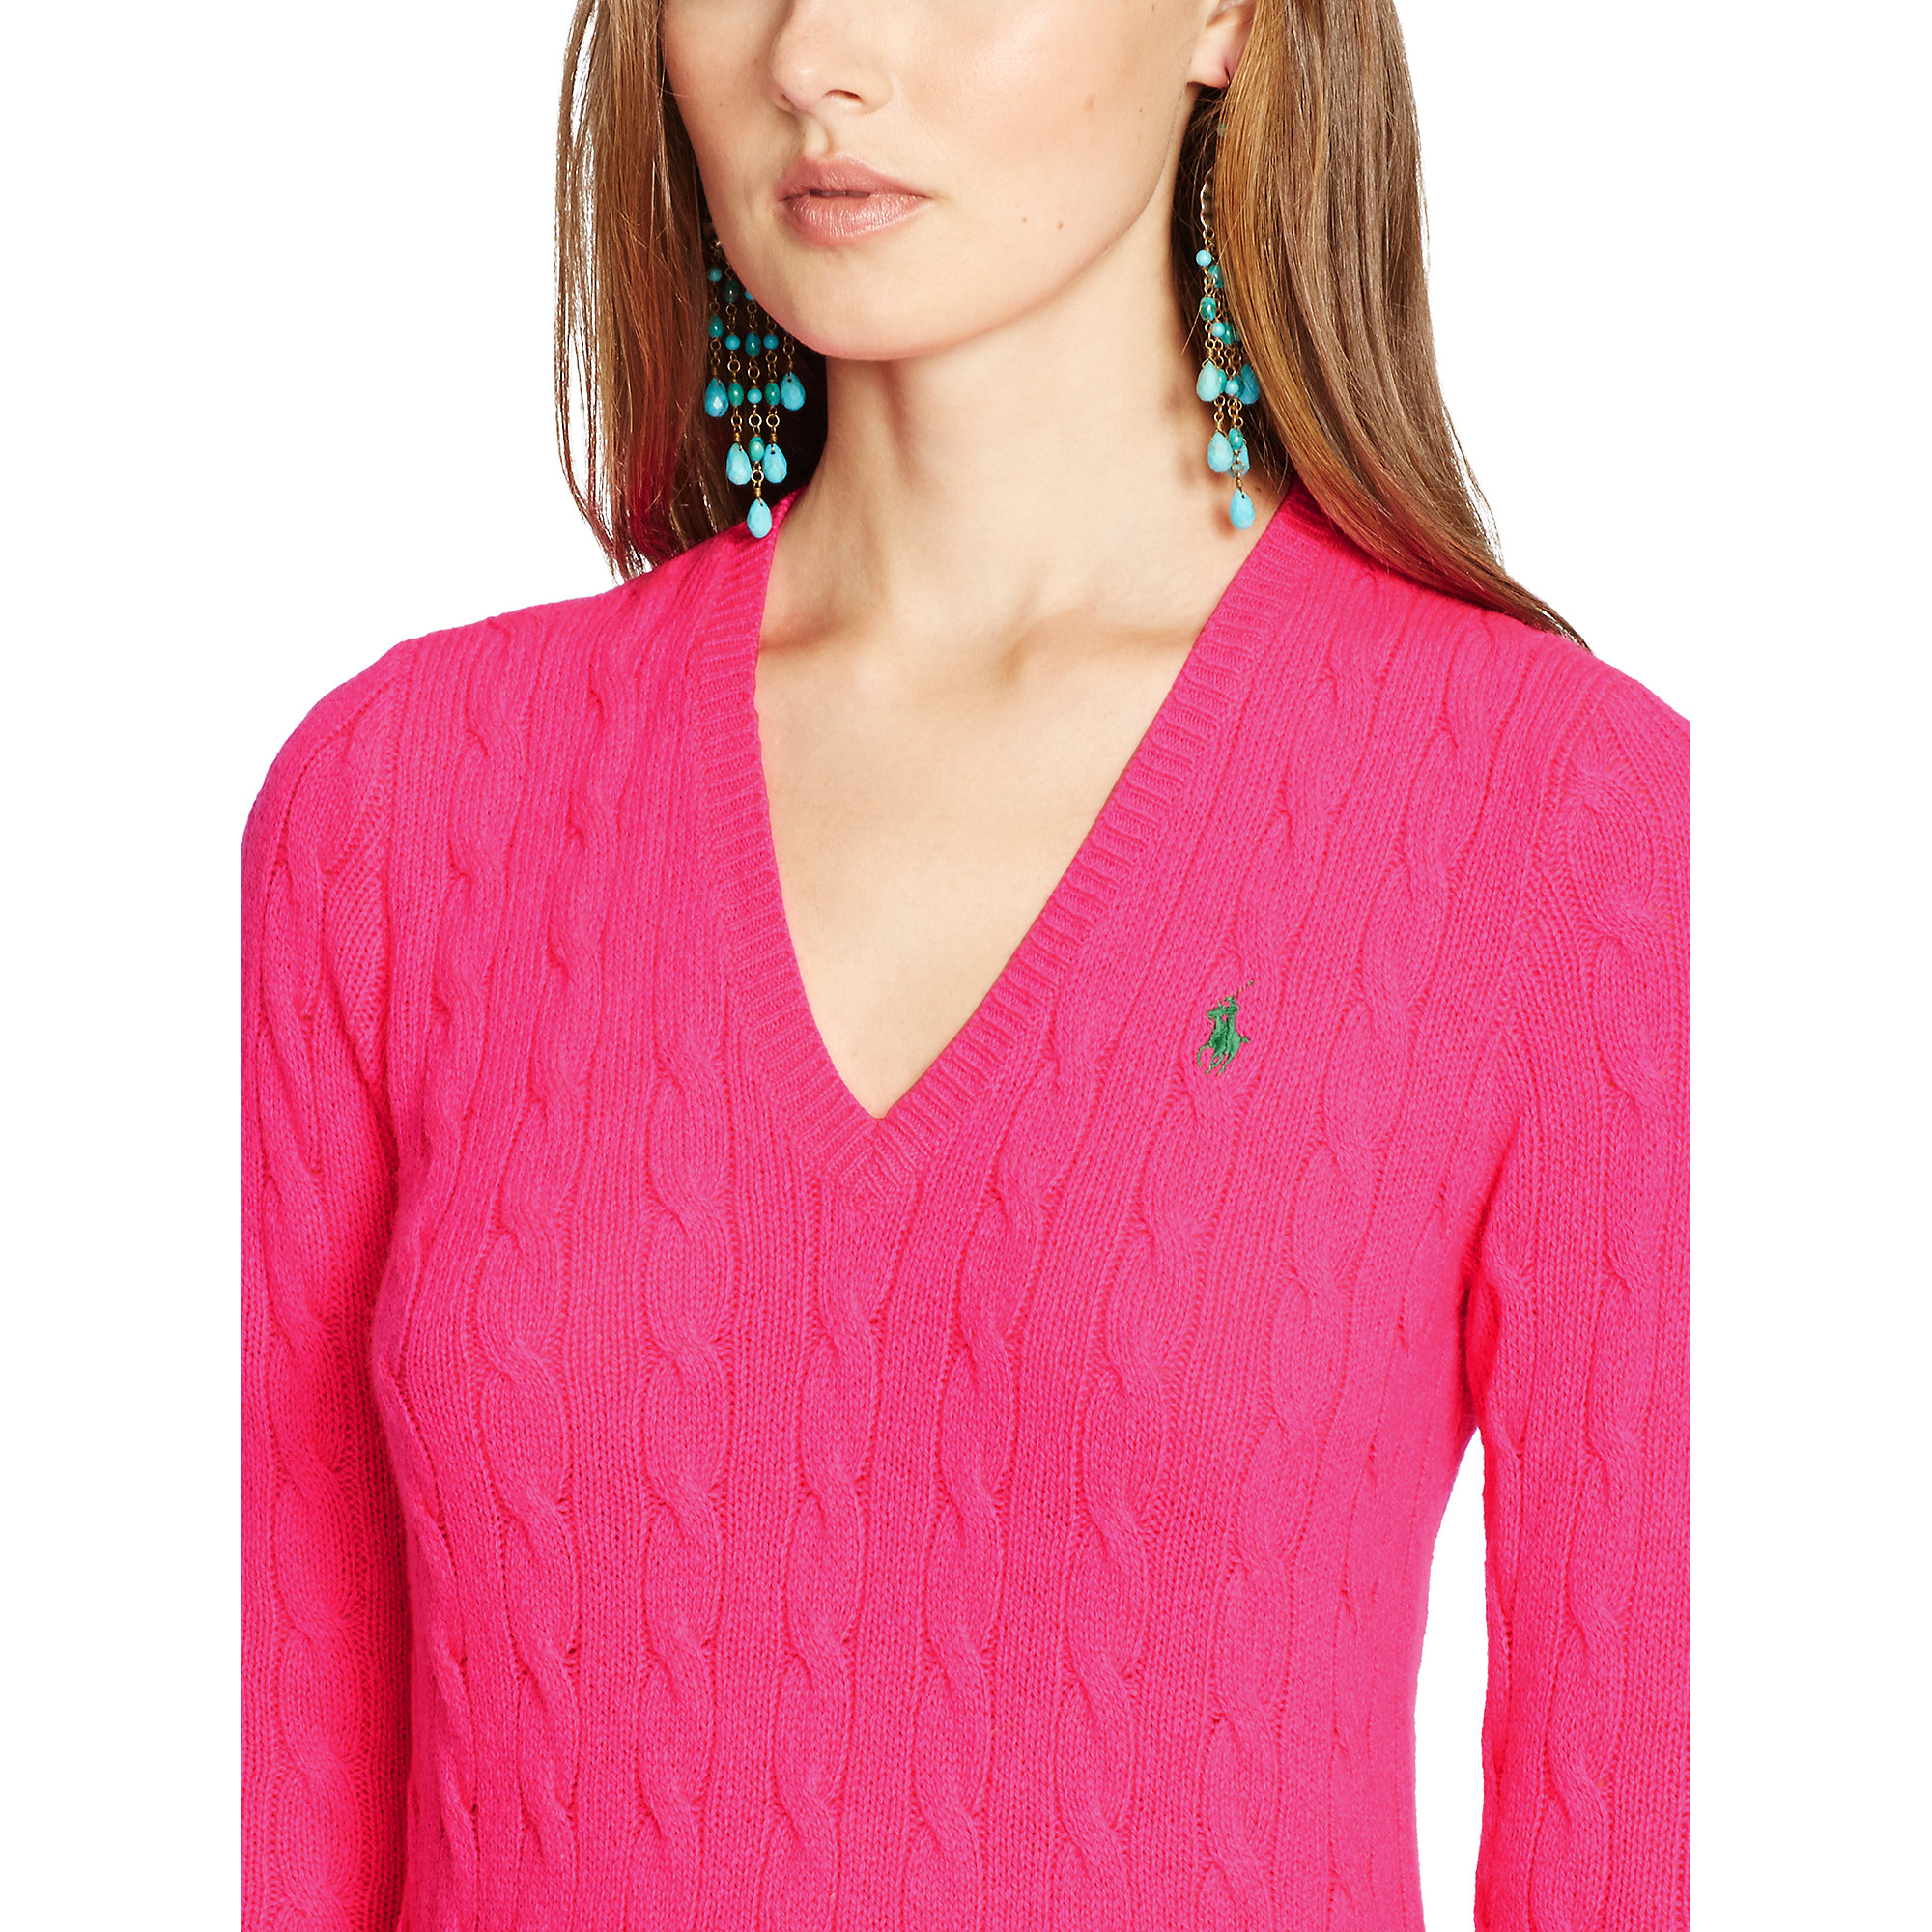 Lyst - Polo Ralph Lauren Cable-Knit V-Neck Sweater in Pink